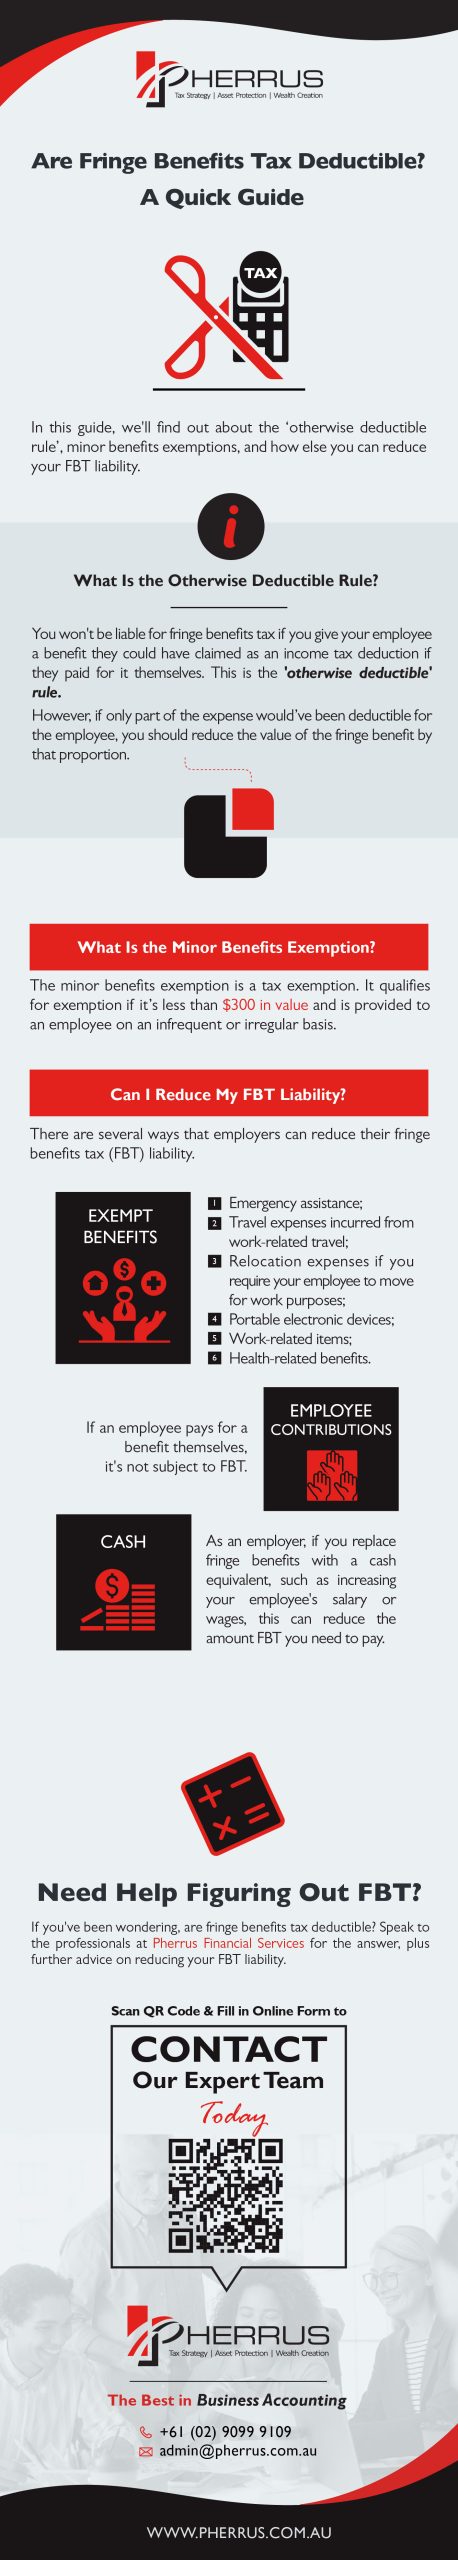 Are Fringe Benefits Tax Deductible - A Quick Guide Infographic